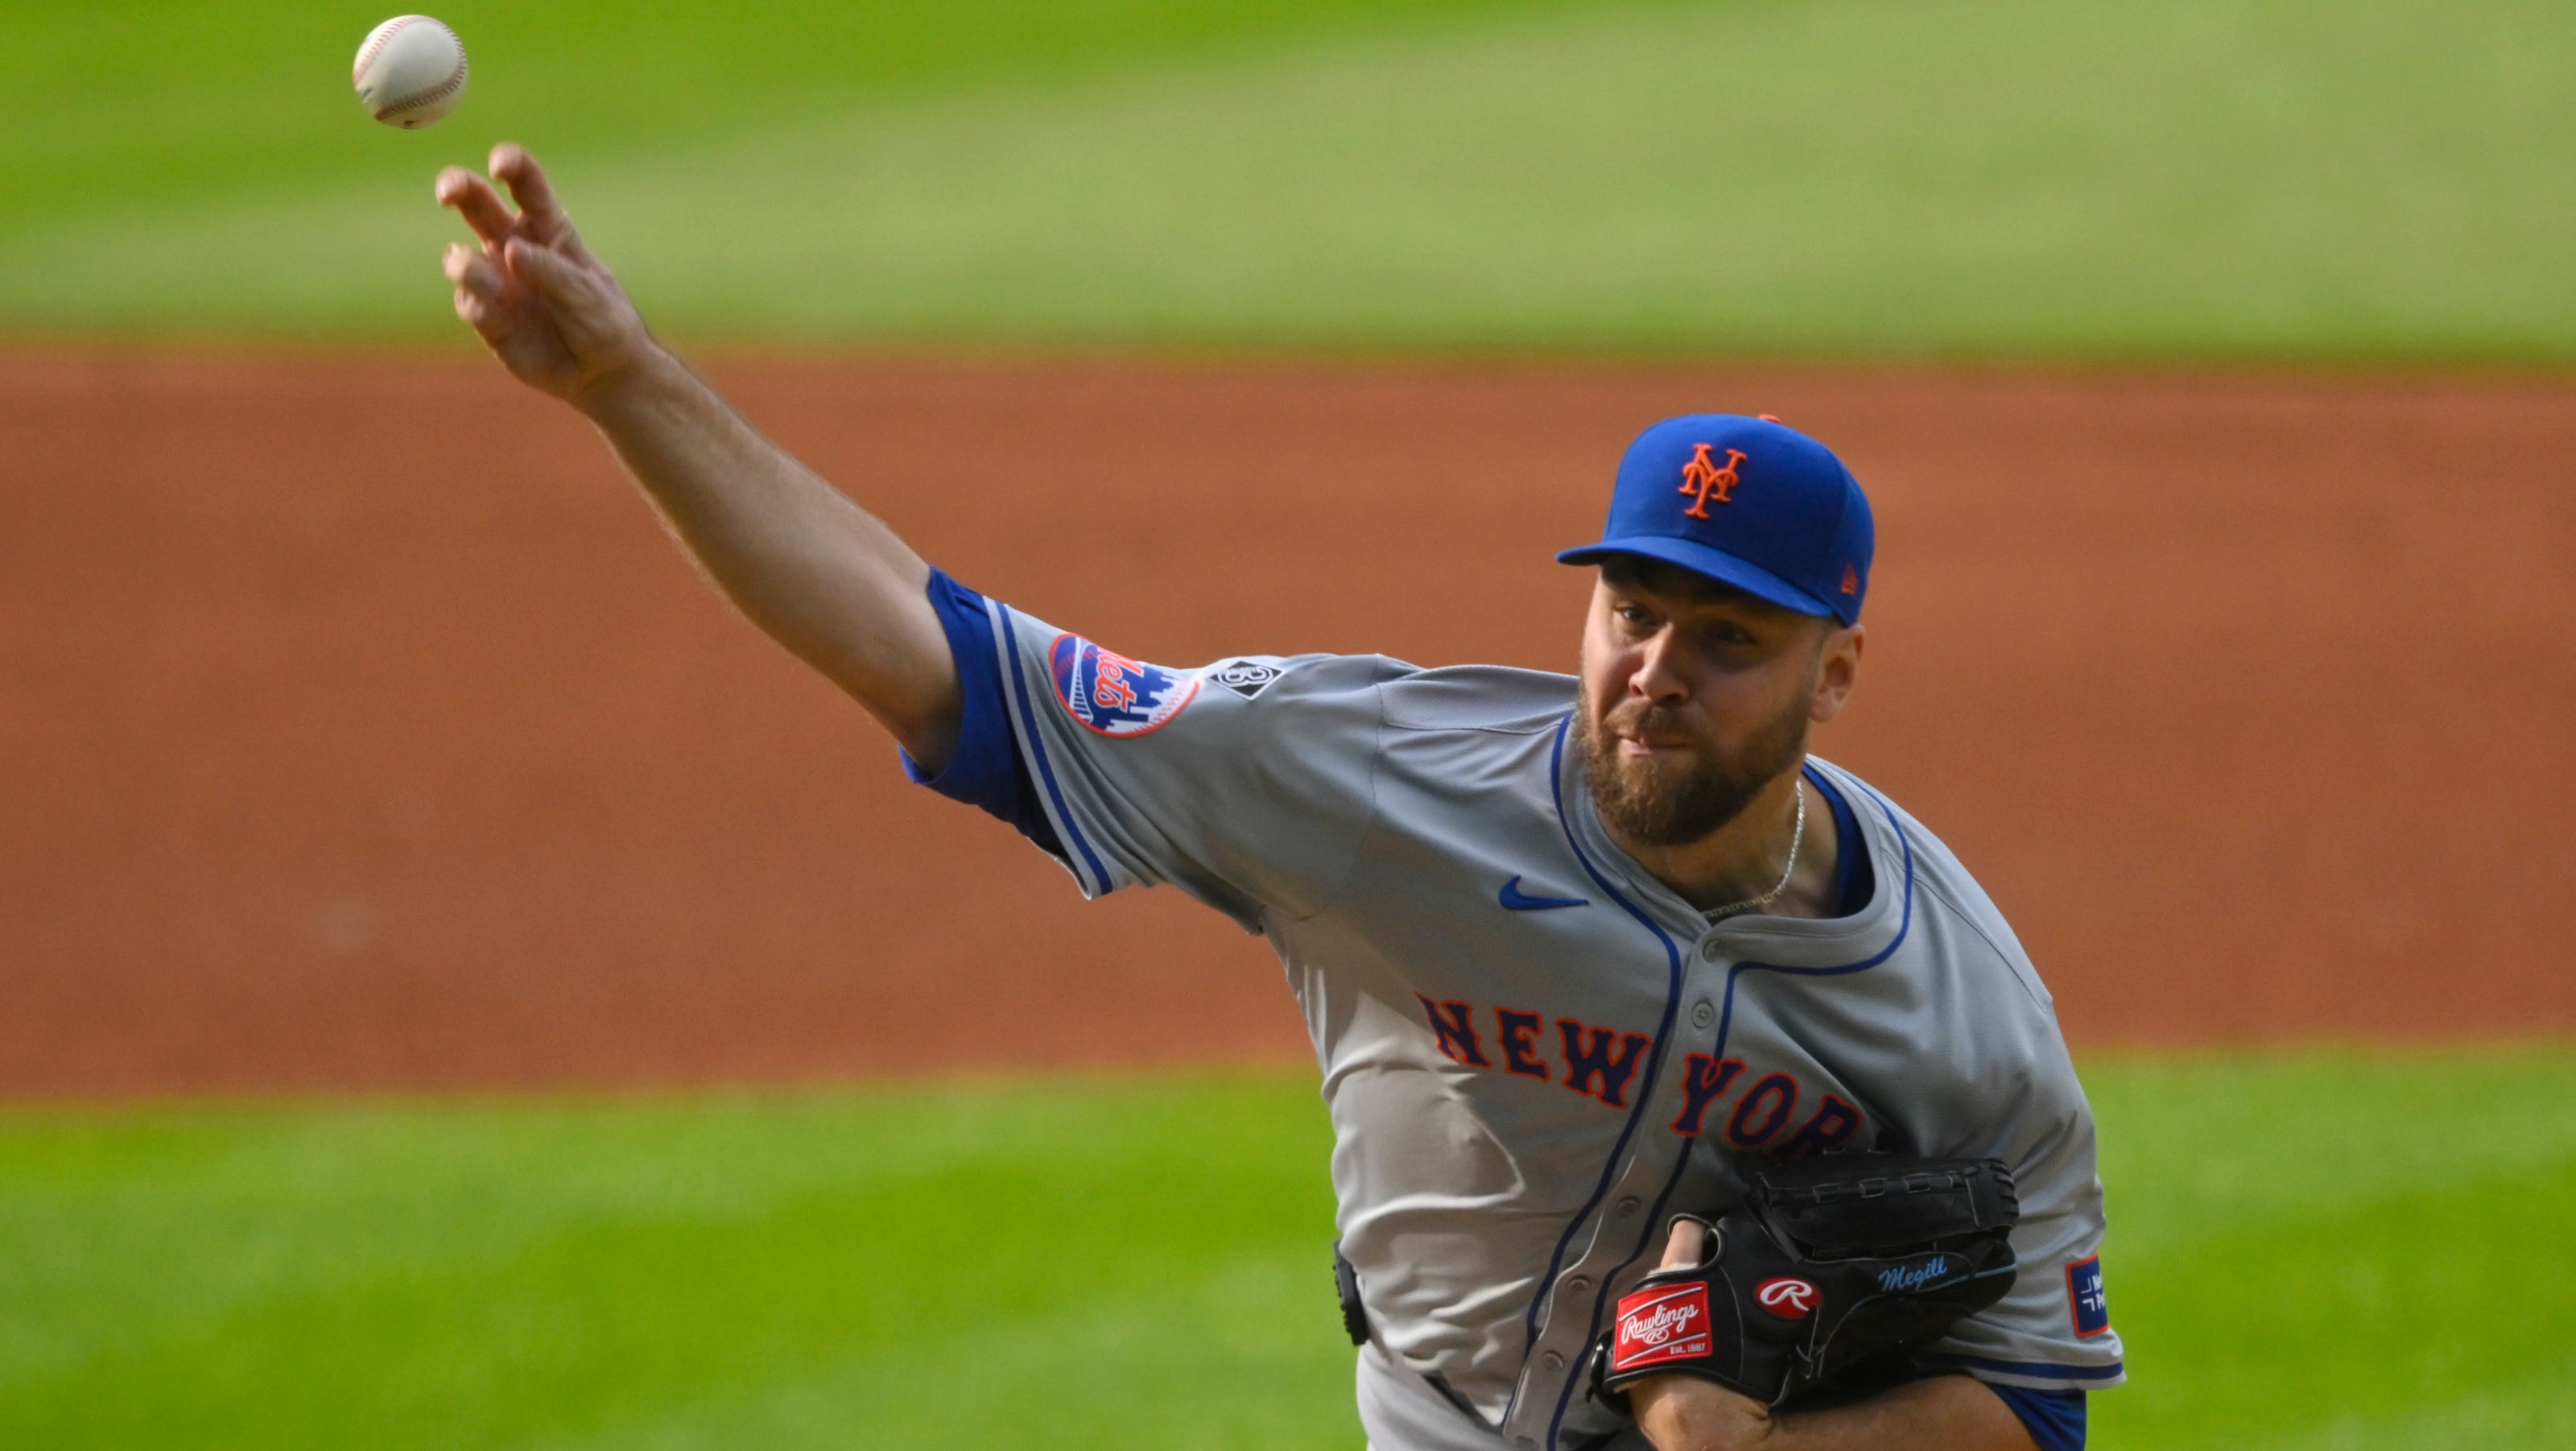 How Mets' Tylor Megill fared in his return to the rotation against the Guardians